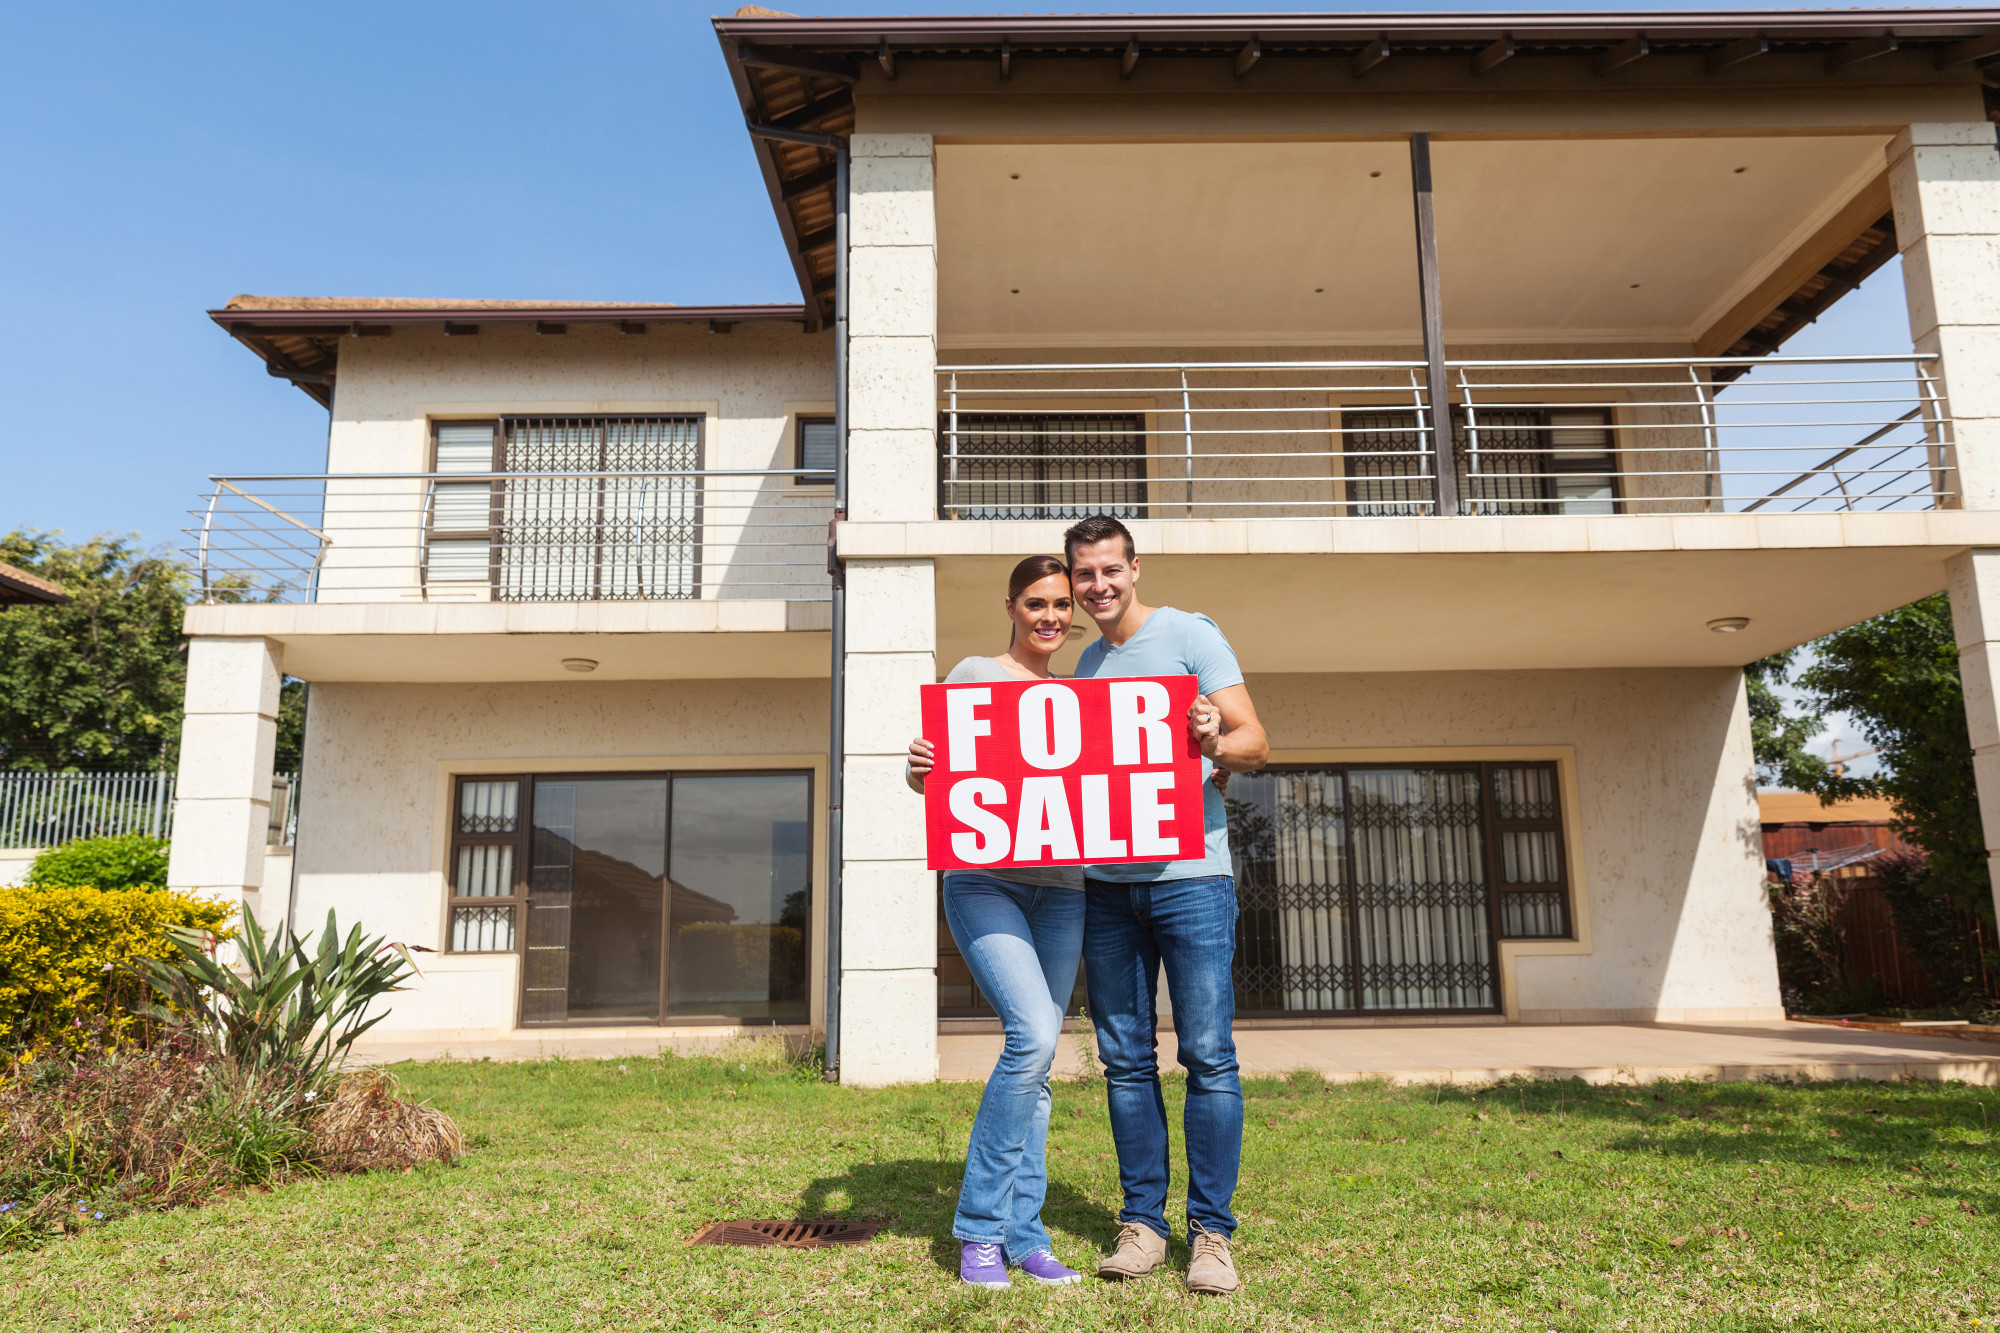 The Costs of Selling a Home Explained